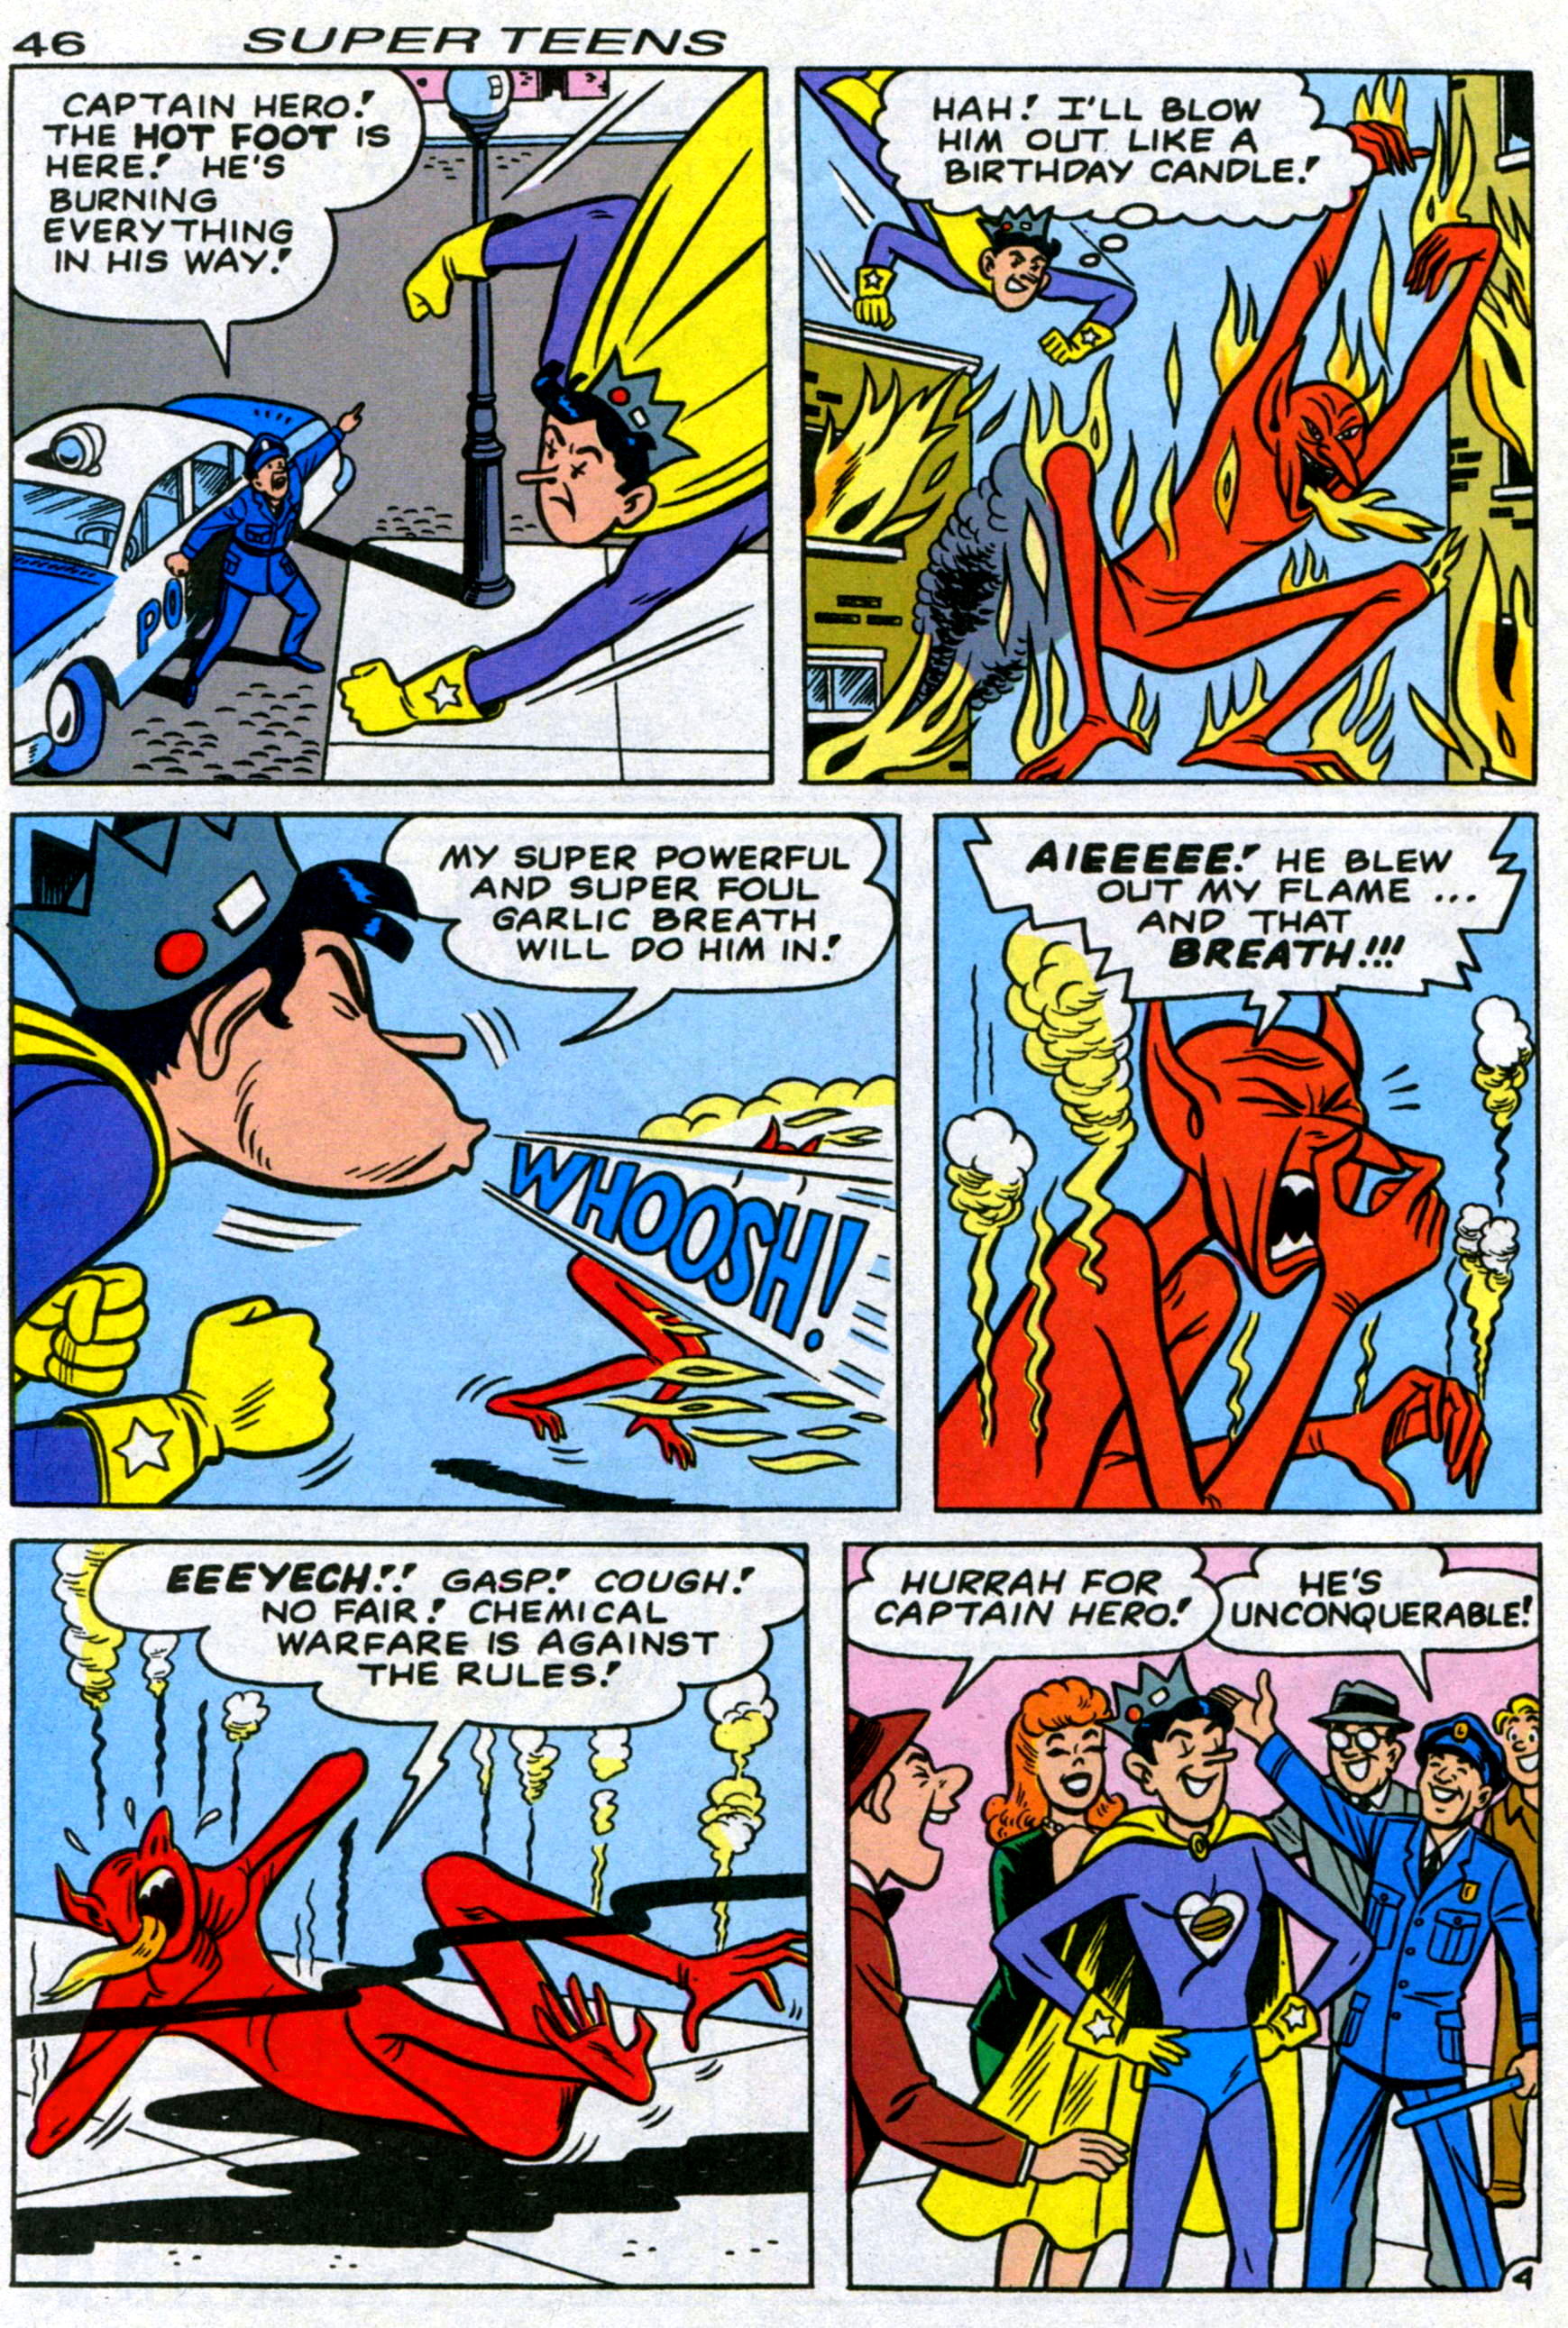 Read online Archie's Super Teens comic -  Issue #1 - 48